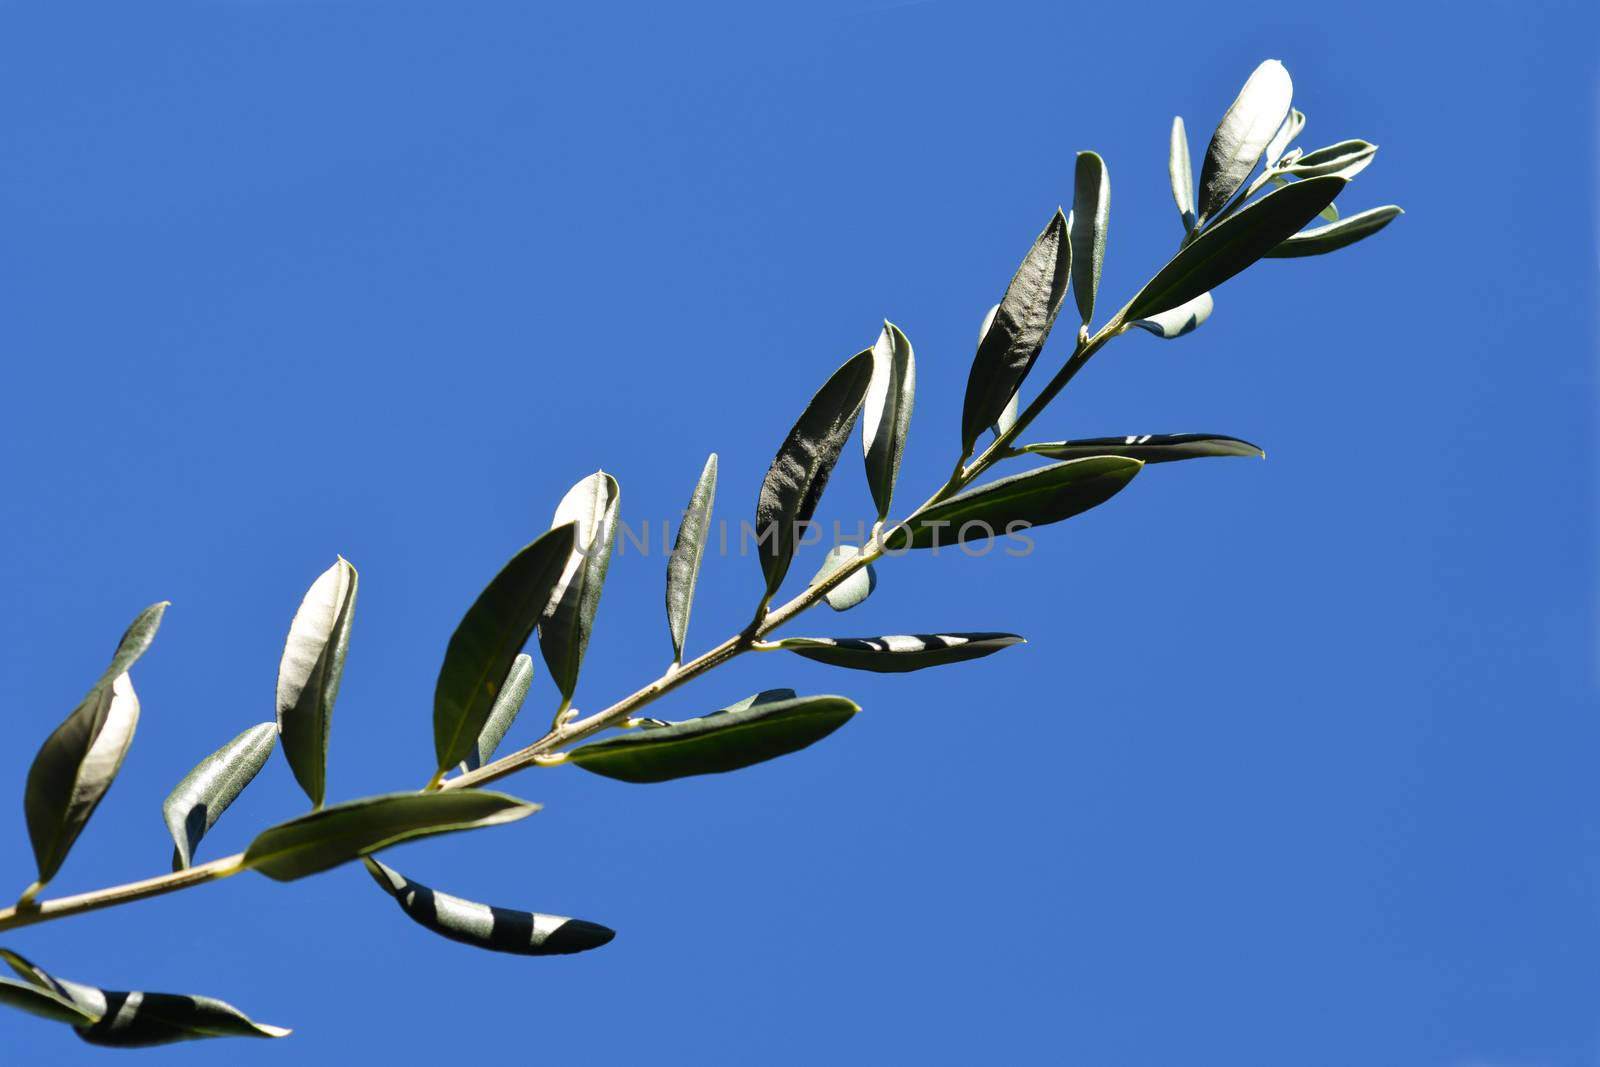 Detail of an olive branch against blue sky